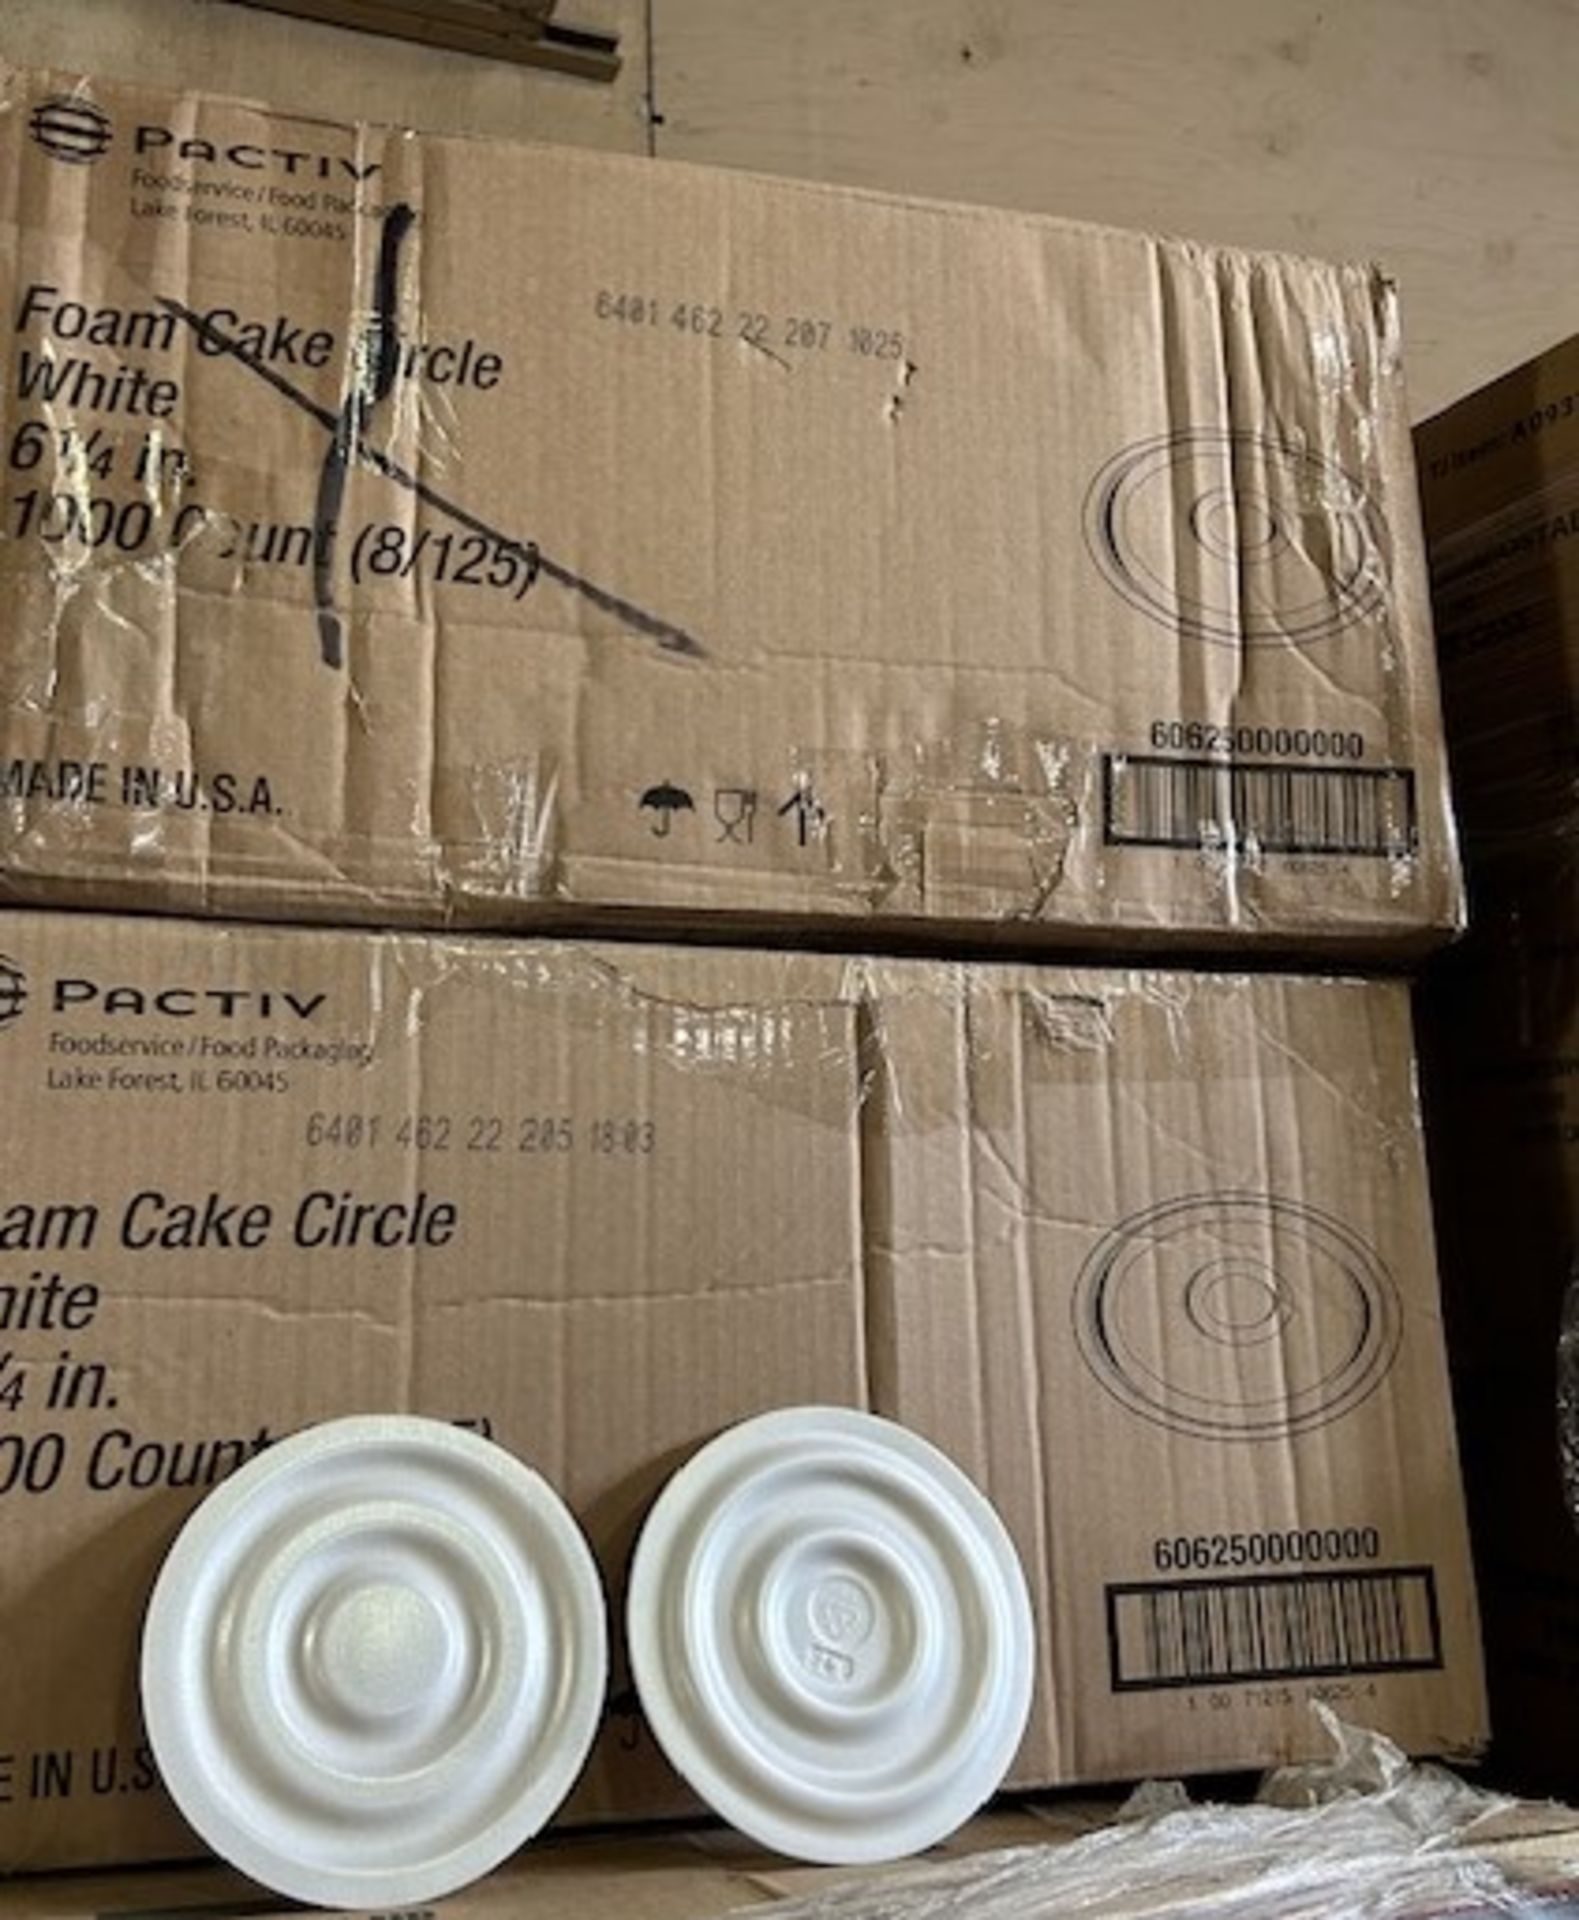 (2) Cases - Pactiv 6-1/4" White Foam Cake Circle (Pack 1000) - Image 2 of 2